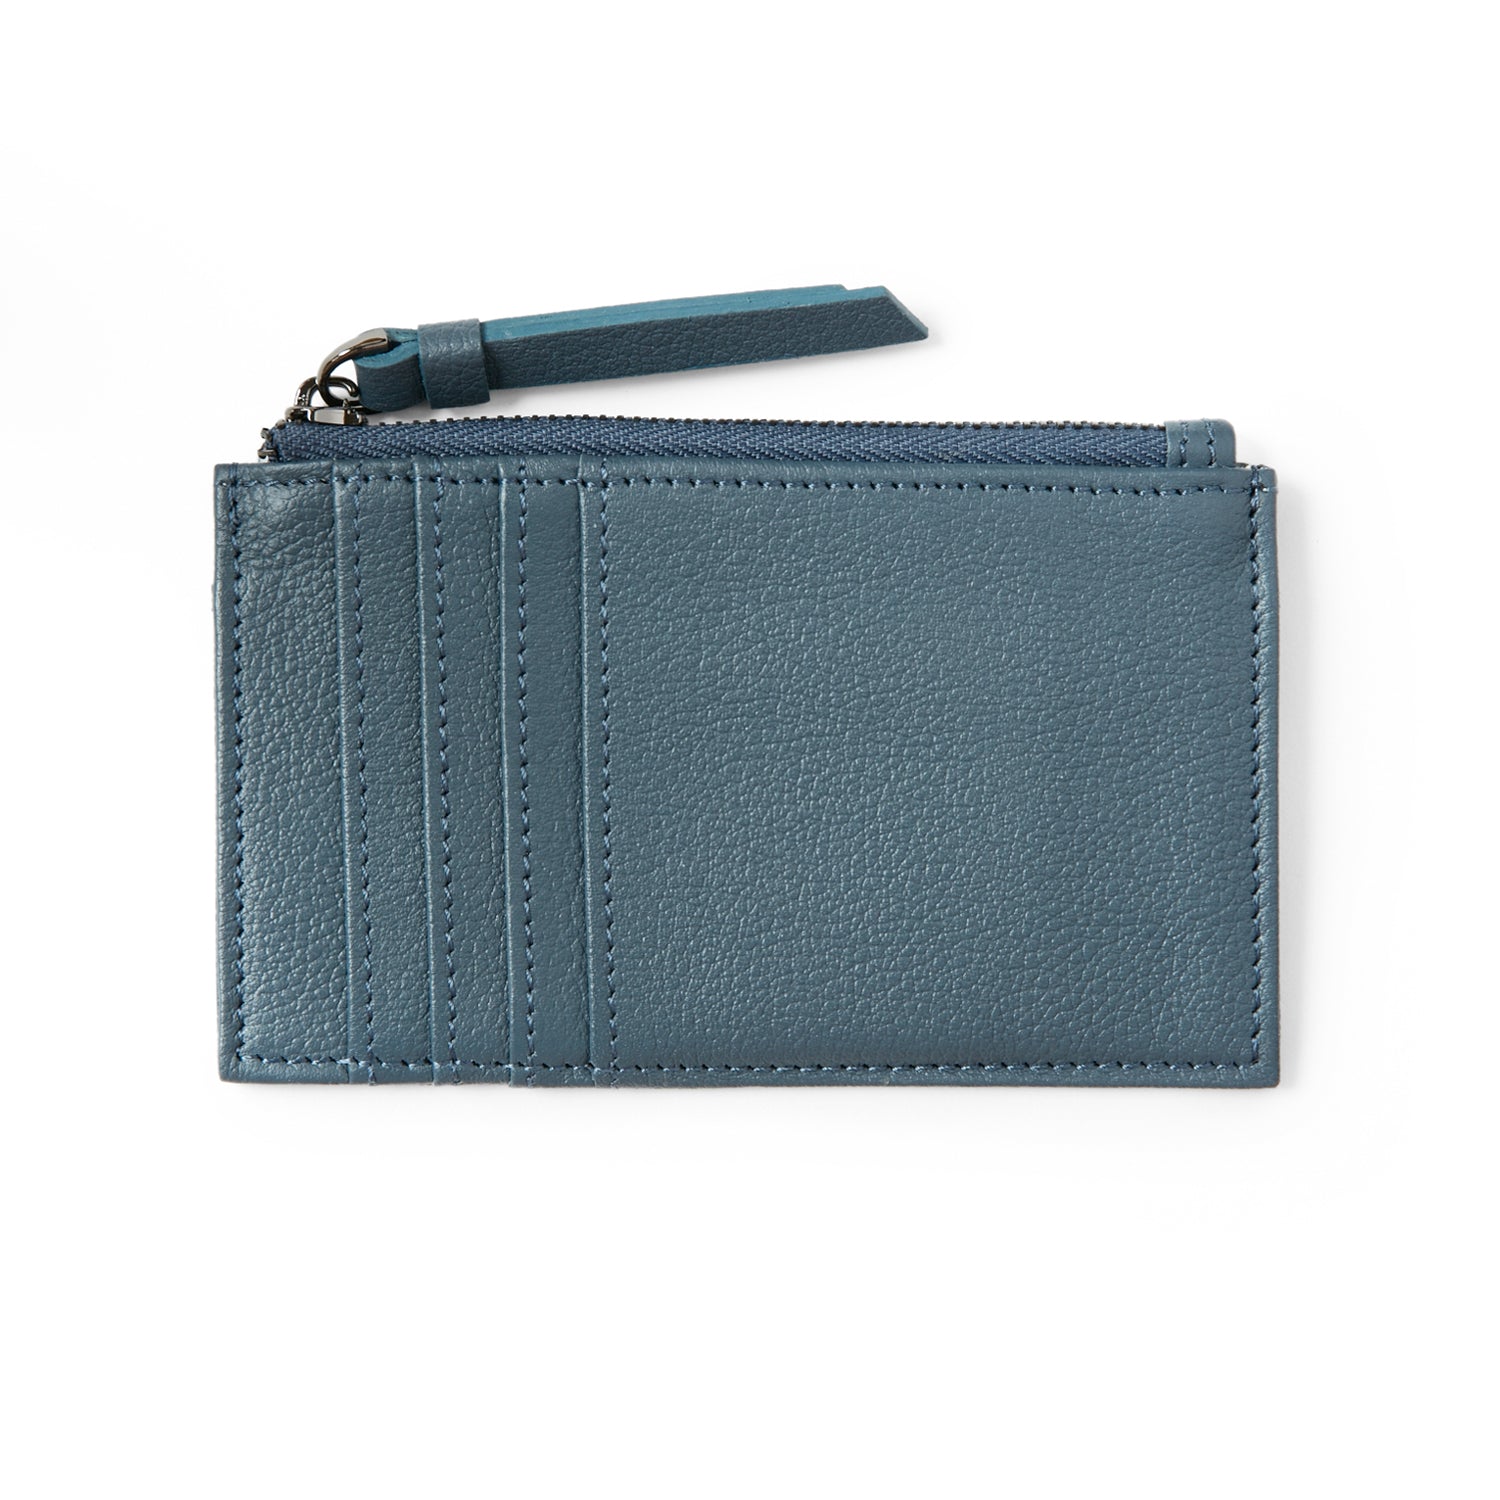 Dicky0750b Designer Wallets Leather Short Wallet Fashion Lady High Quality  Shinny Card Holder Coin Purse Women Classic Zipper Pocket Credit Card From  Dicky0750b, $22.91 | DHgate.Com